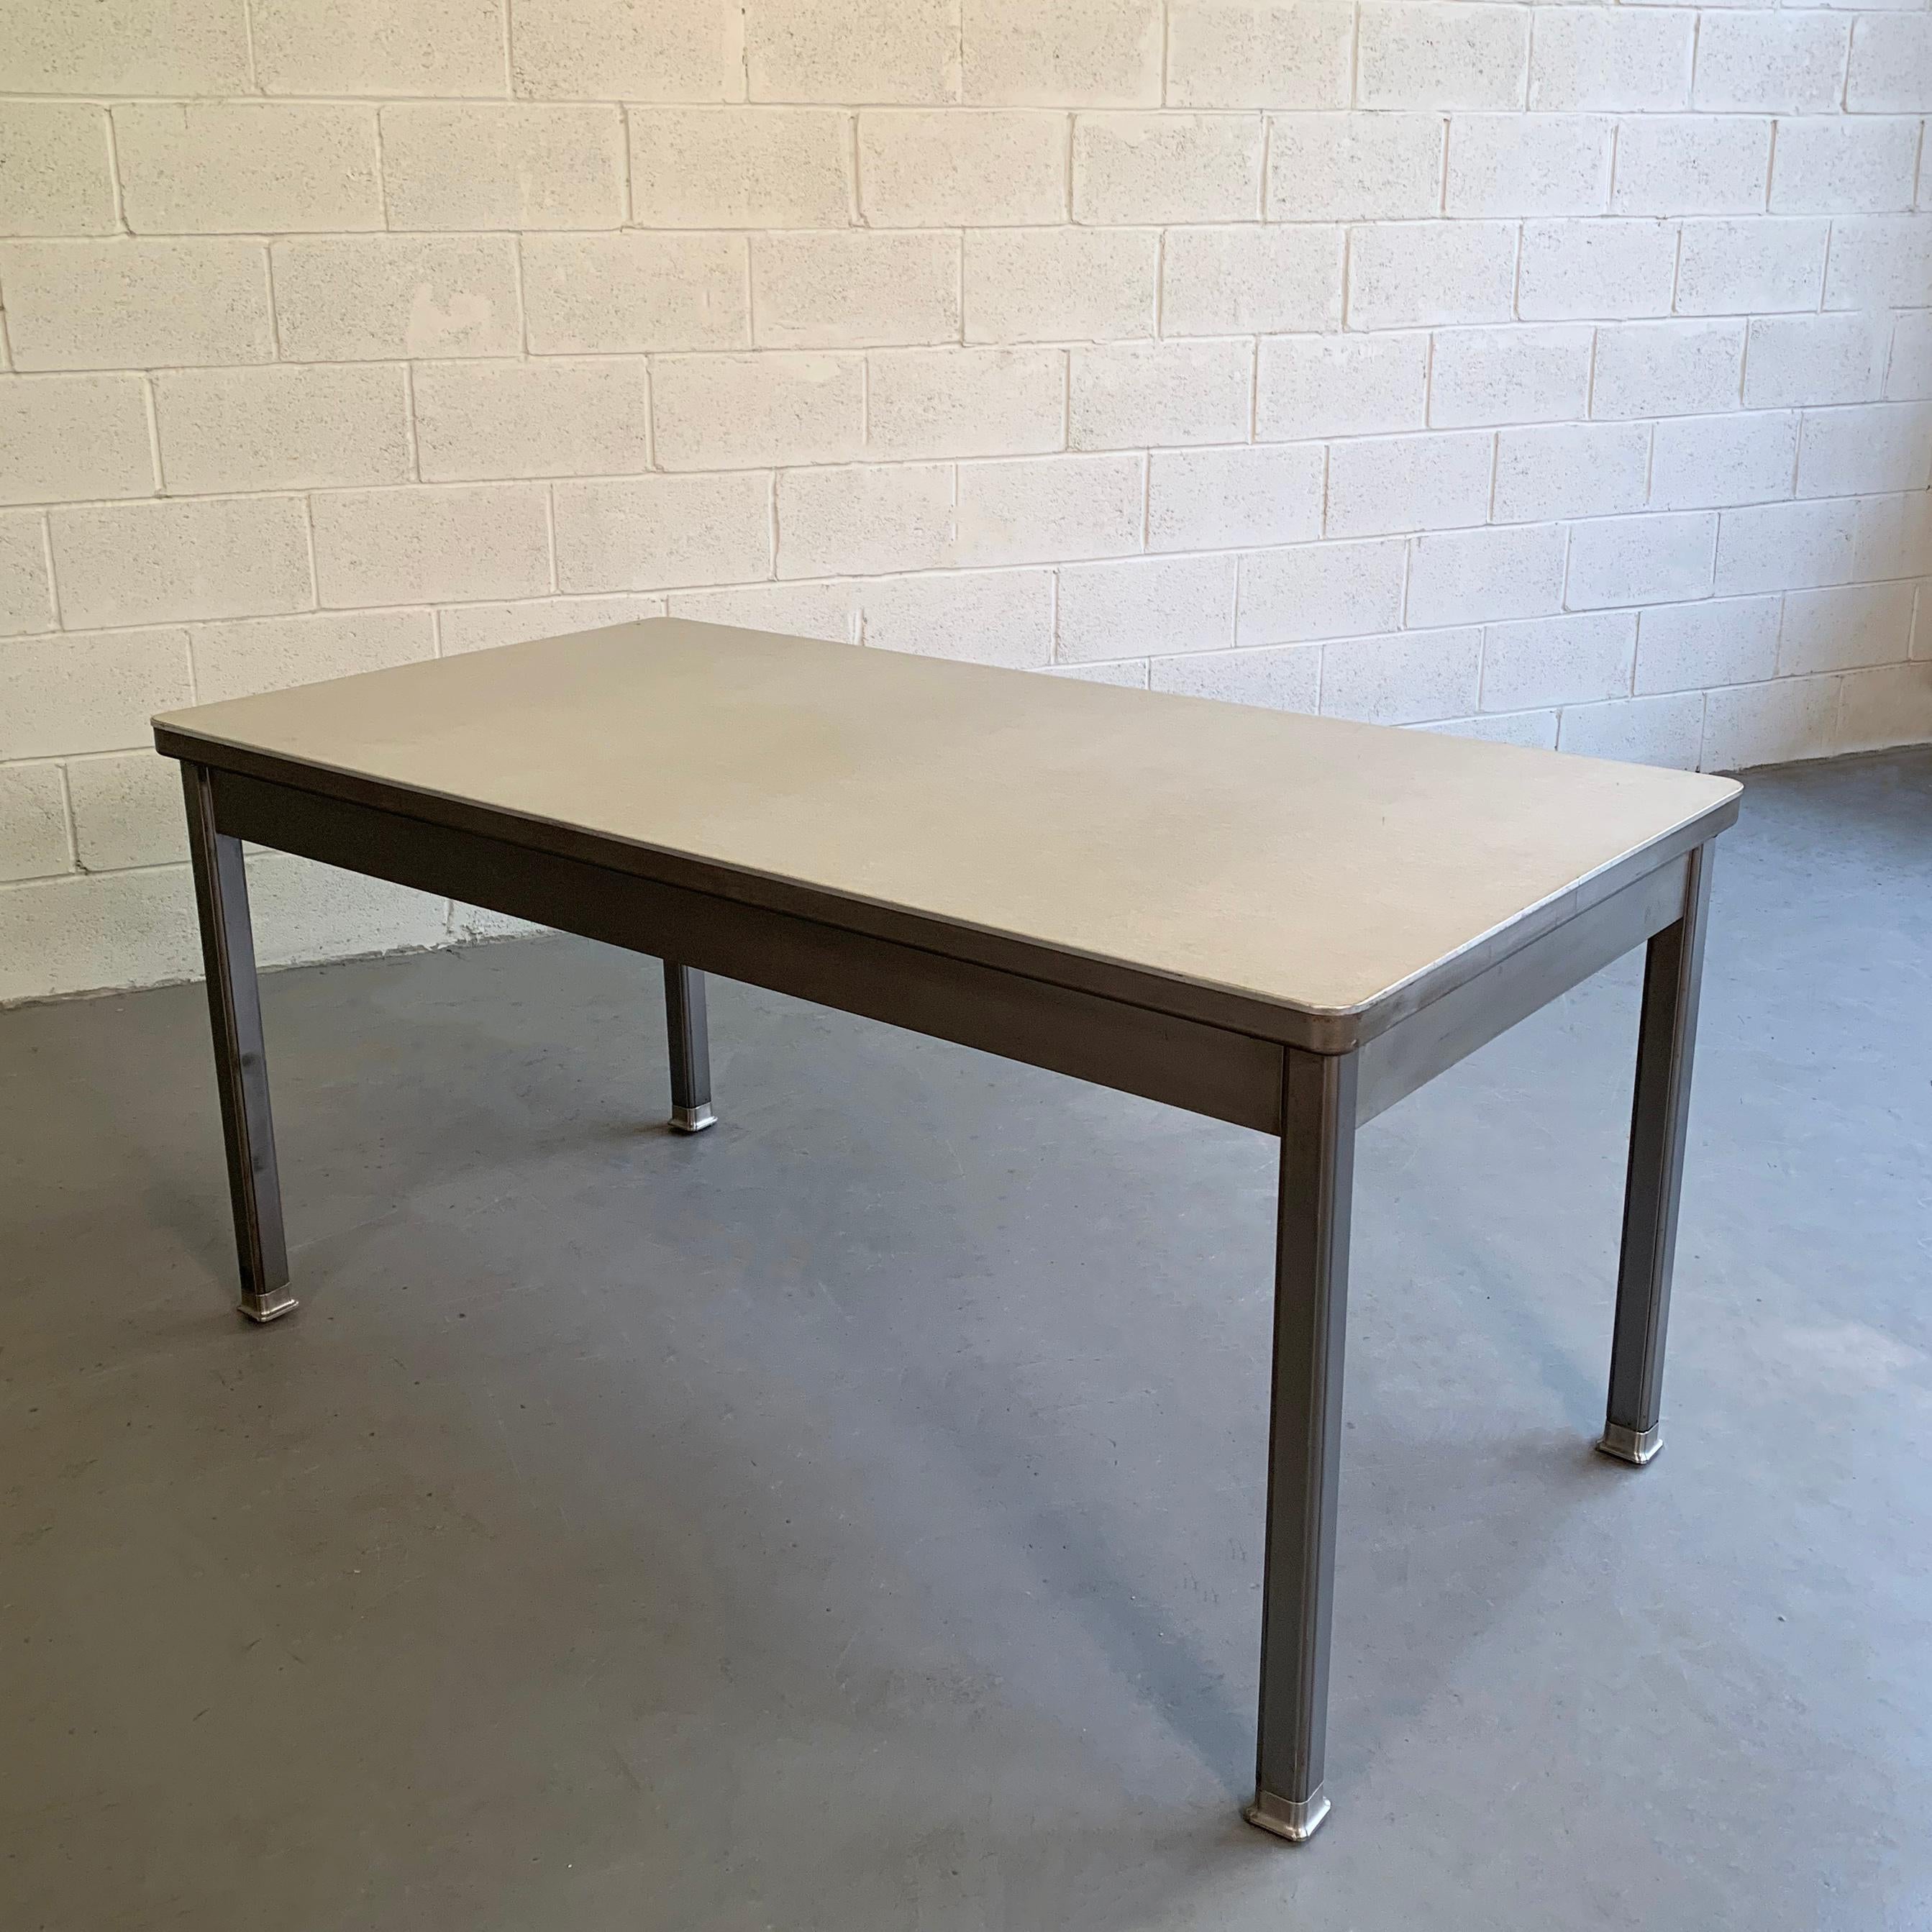 20th Century Industrial Midcentury Police Station Desk by General Fire Proofing Company